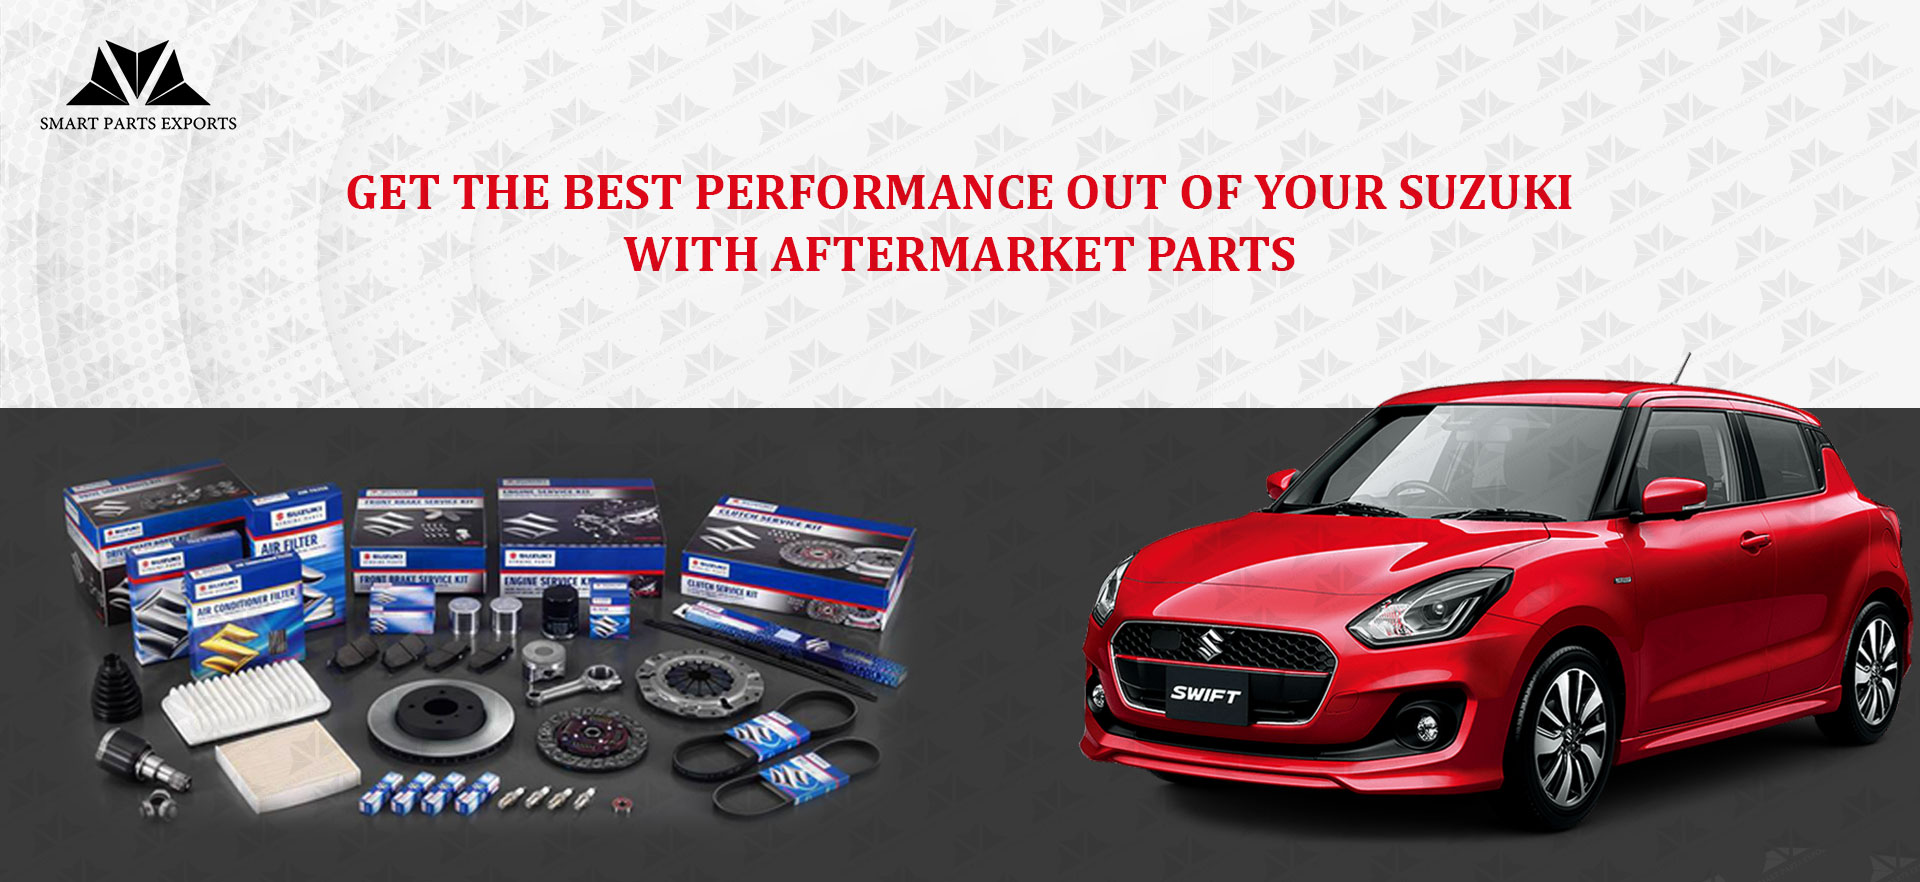 Get The Best Performance Out of Your Suzuki with Aftermarket Parts